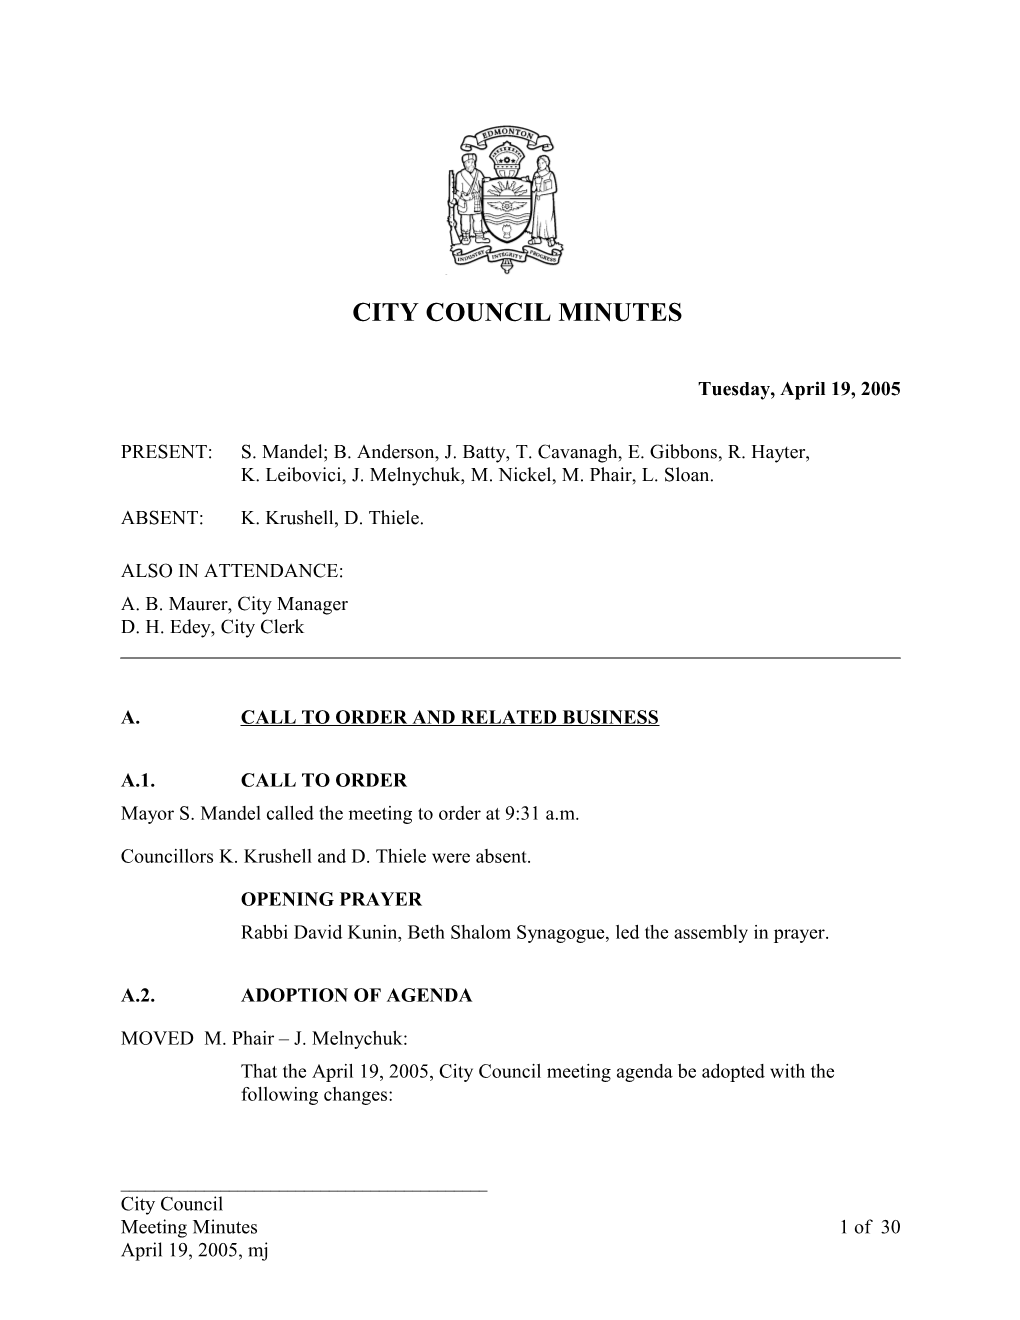 Minutes for City Council April 19, 2005 Meeting